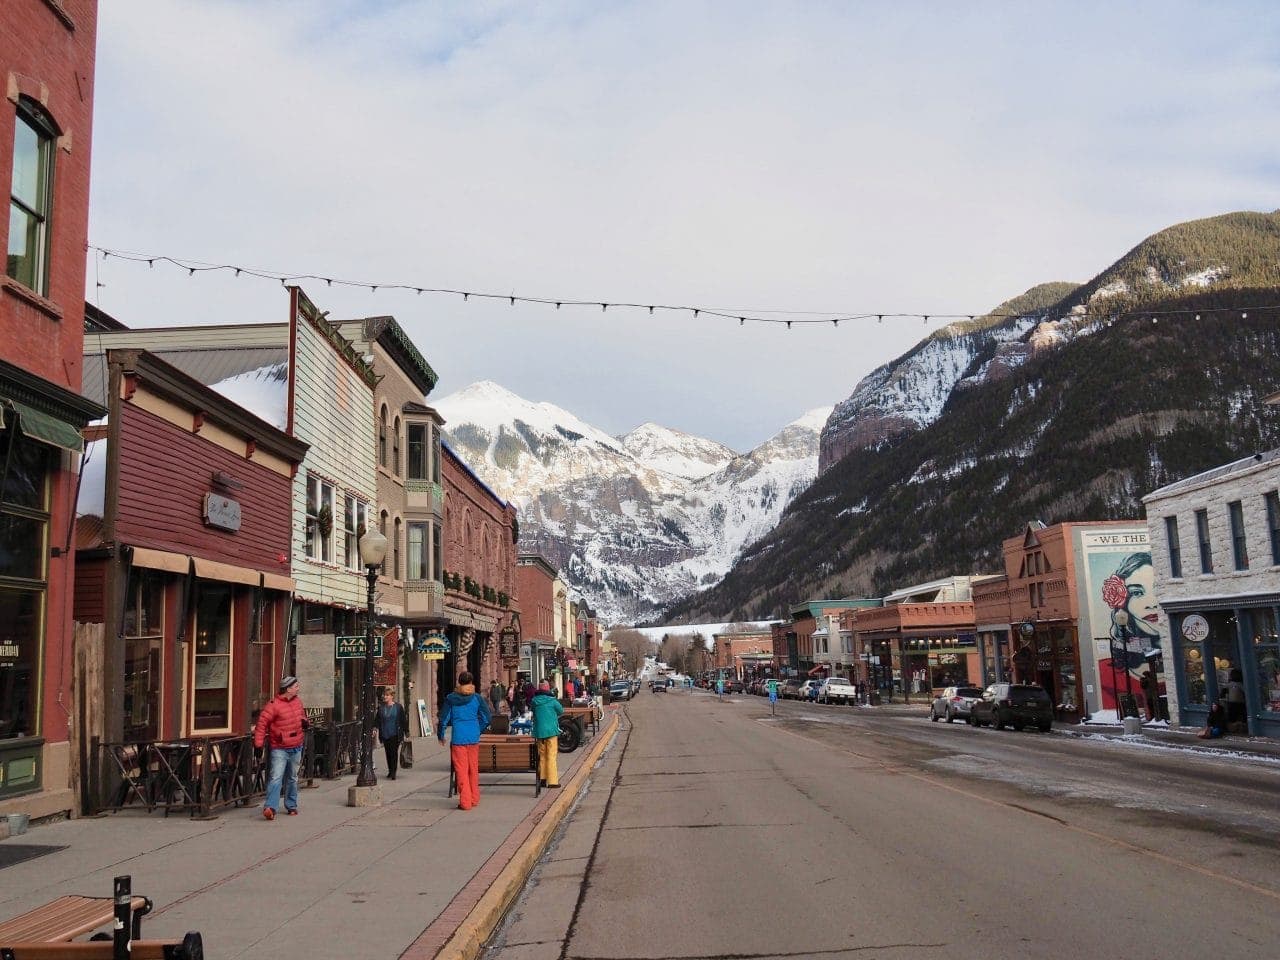 A classic view of downtown Telluride, CO